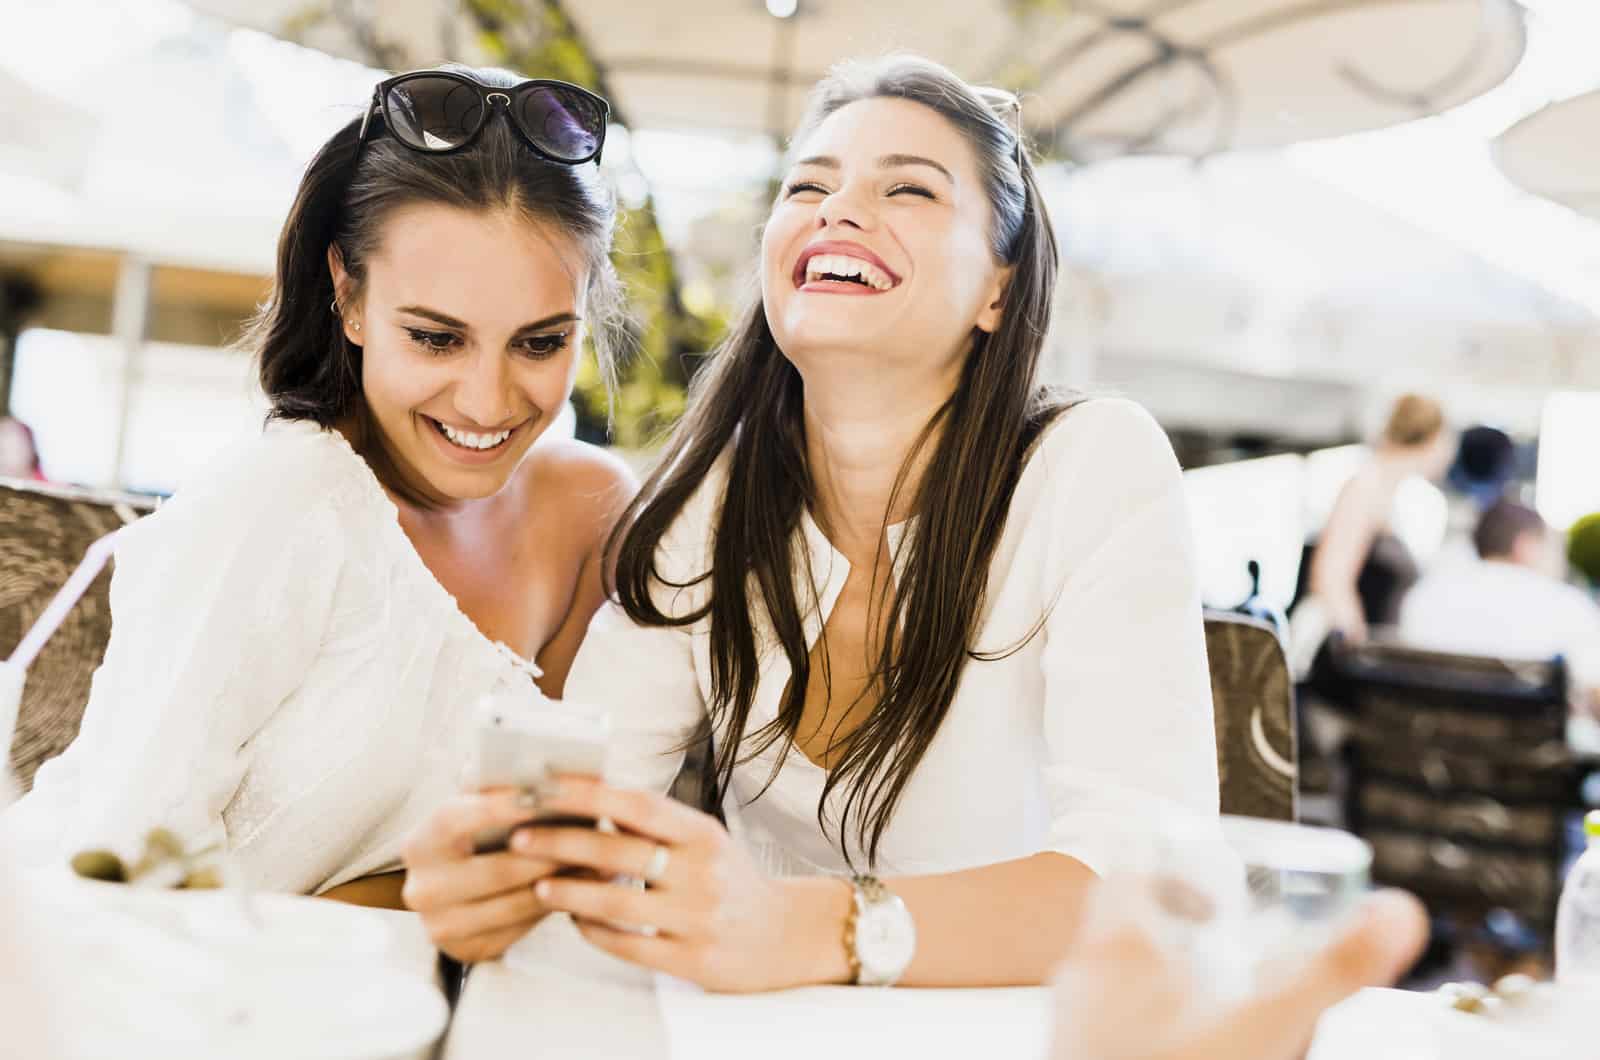 two young woman looking at phone laughing